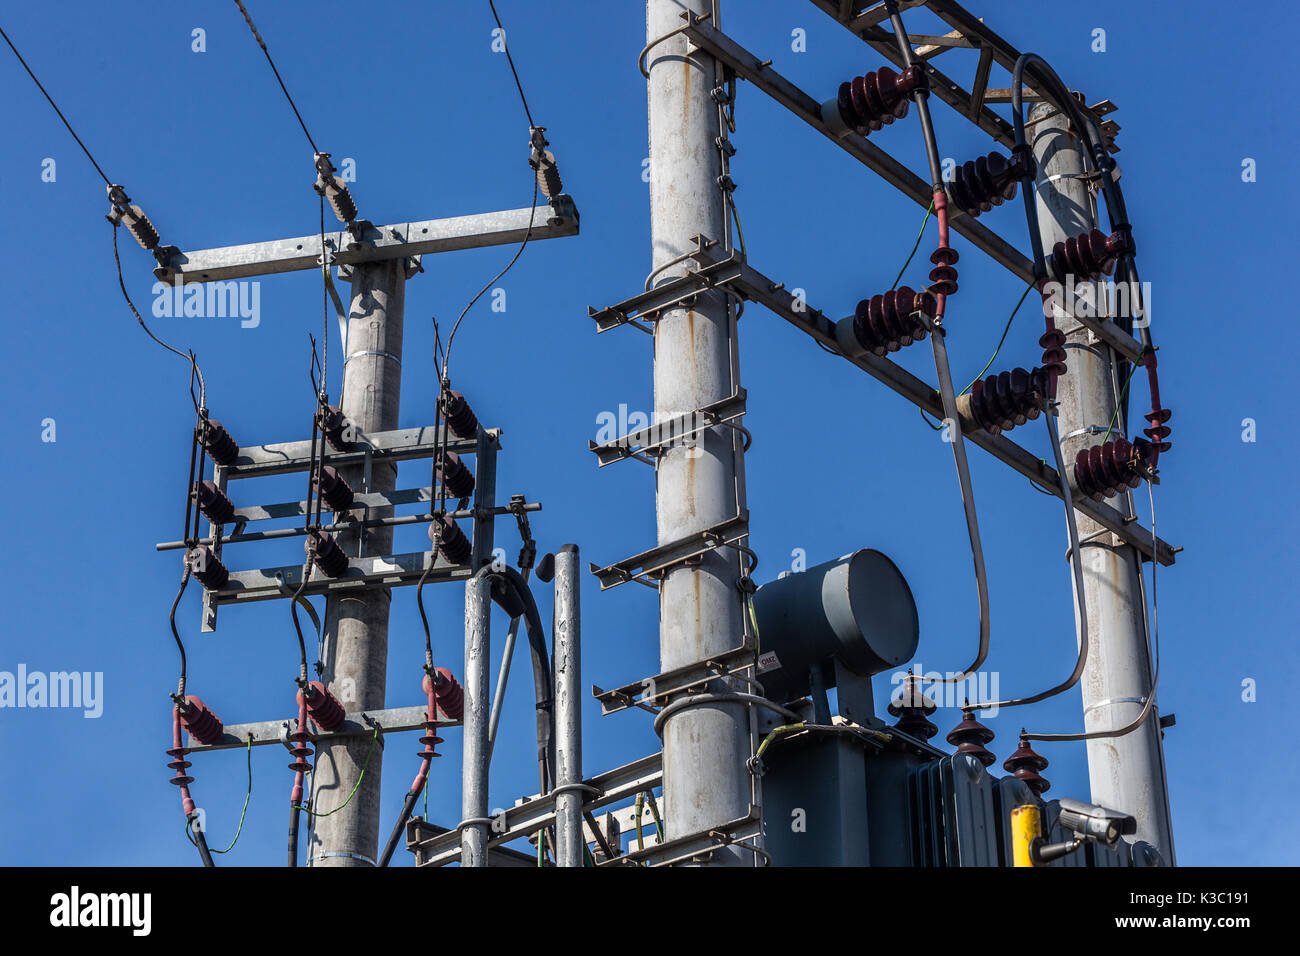 Power lines and Electrical power transformer in a rural setting Czech Republic Isolators Stock Photo